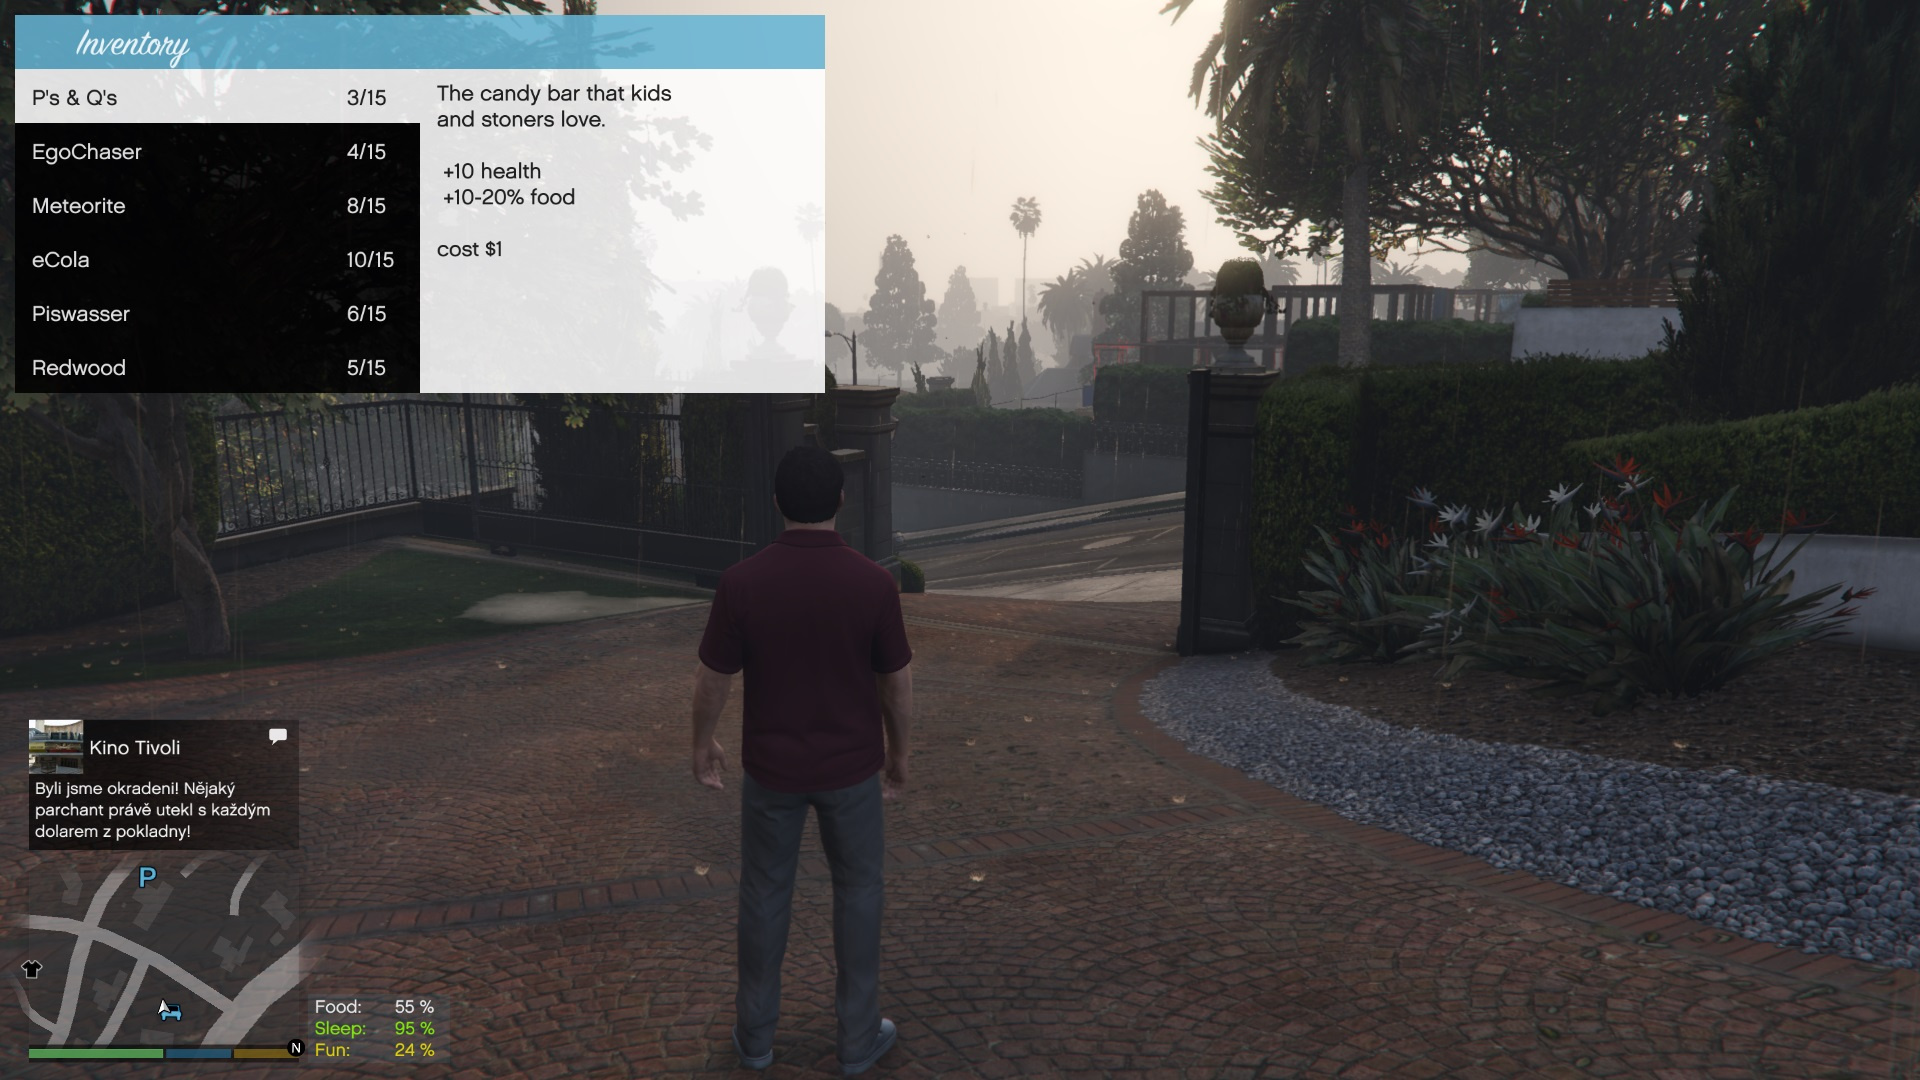 How to install GTA 5 mods on PC